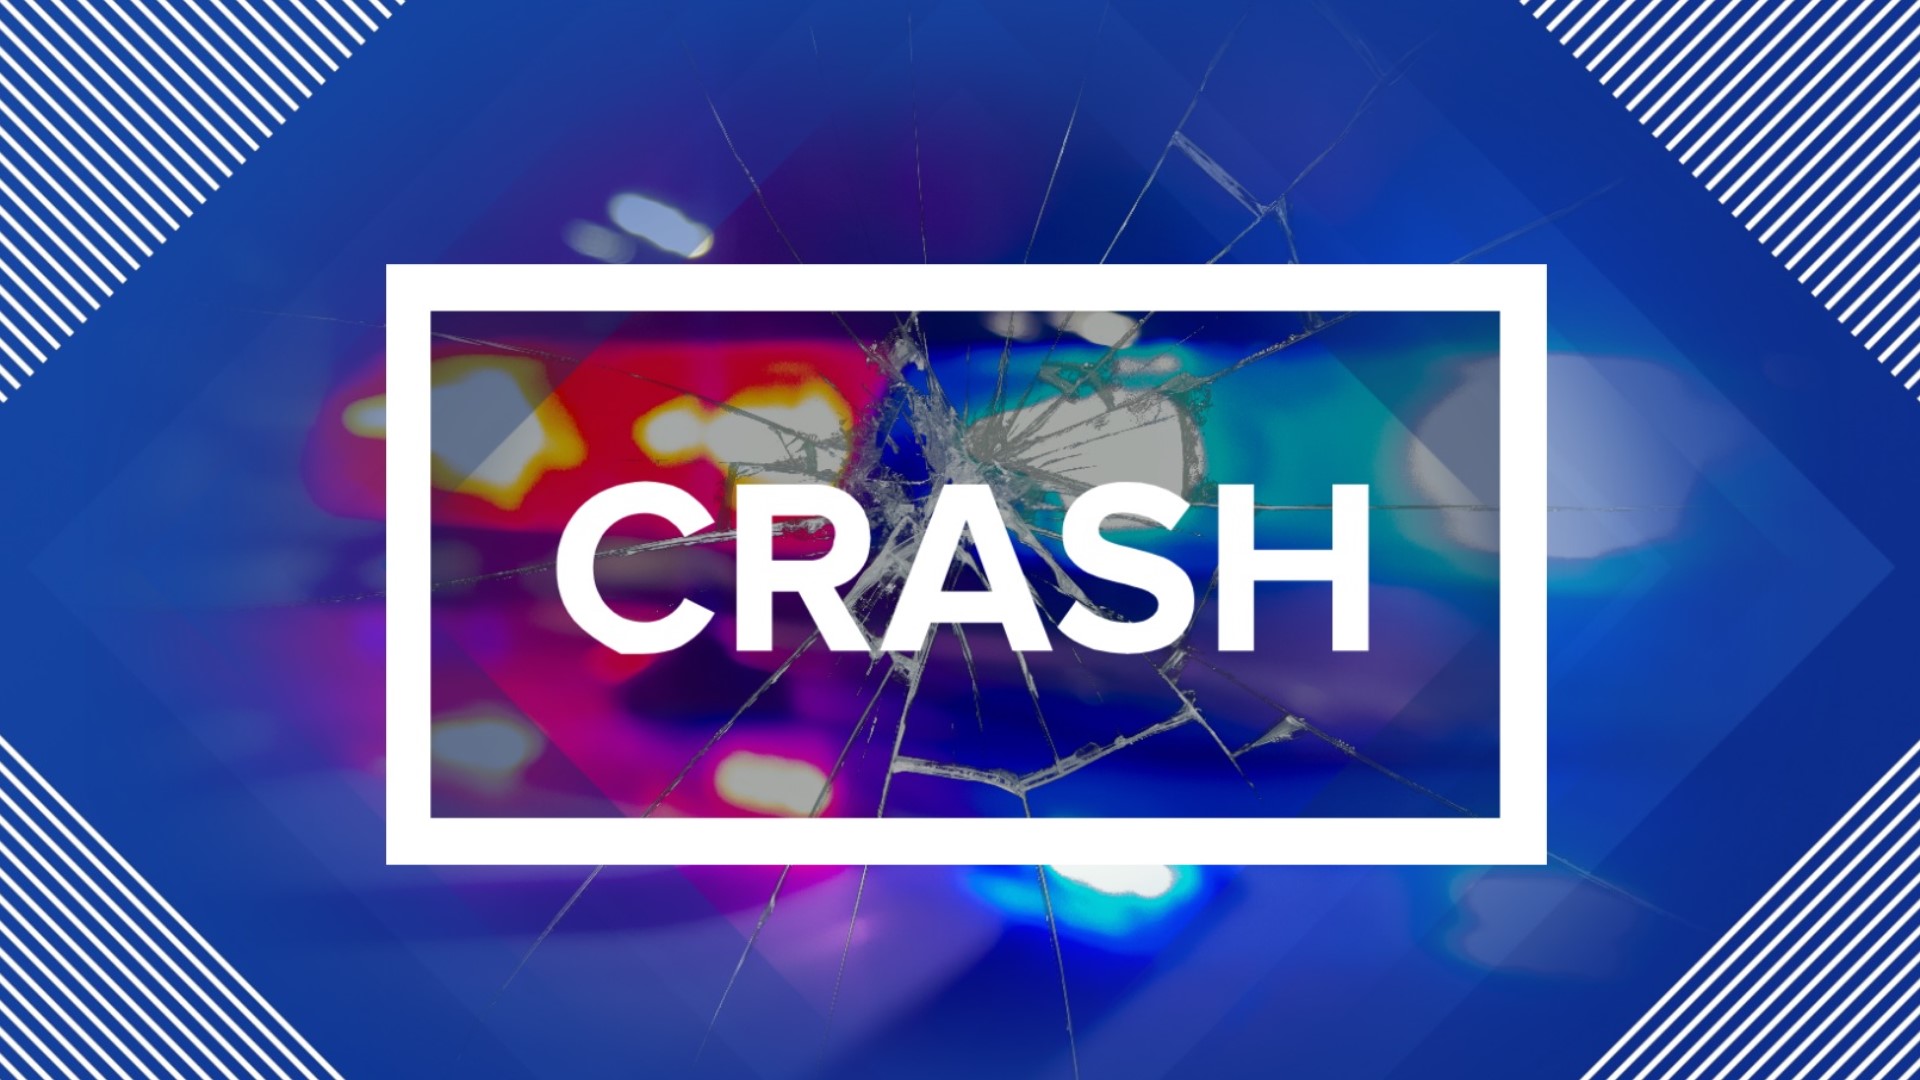 Two people died after three vehicles collided on I-10 East near the N. Claiborne off-ramp, closing the interstate highway there.